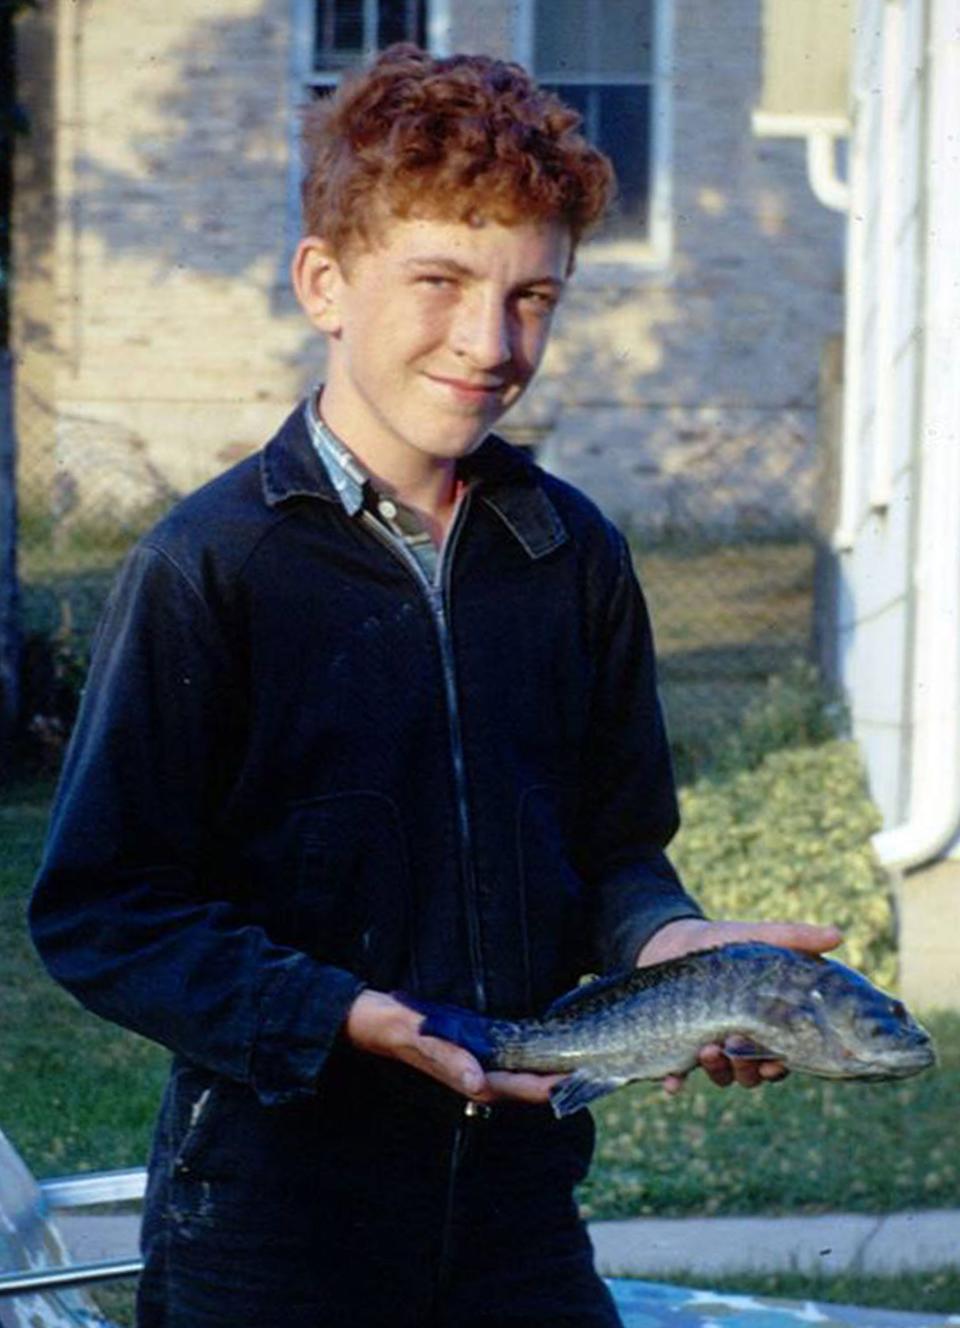 Gary Klein holds a small mouth bass he caught on the Milwaukee River near Waubeka during the 1970s. The image was scanned from a Kodachrome transparency.